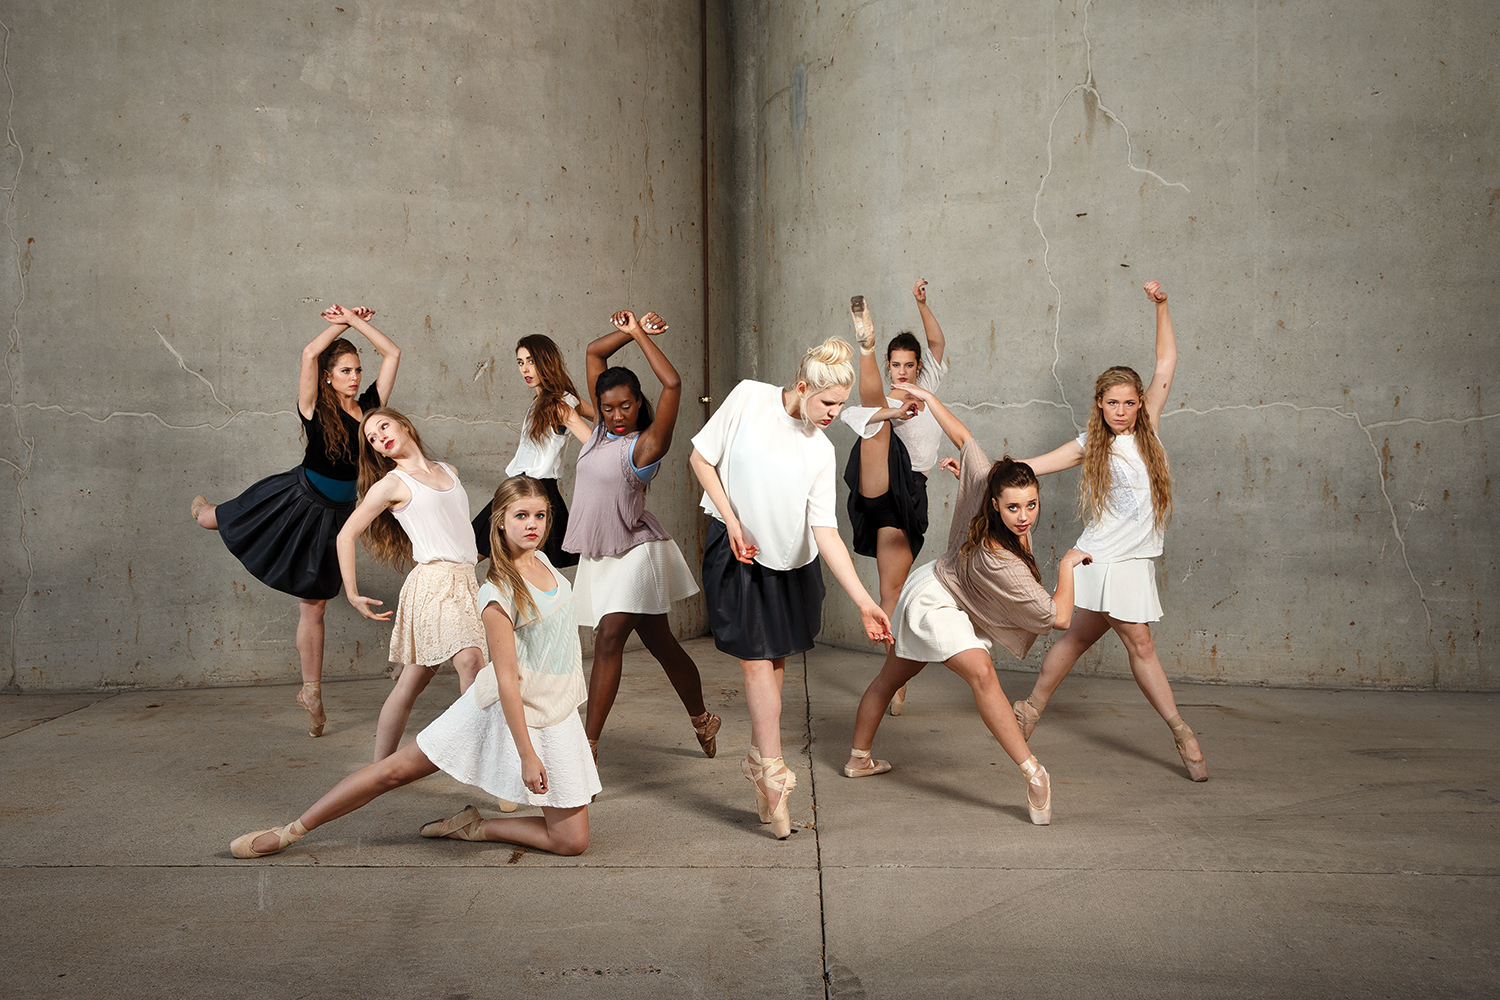 BYU Theatre Ballet dancers posing in dance moves for a photoshoot.